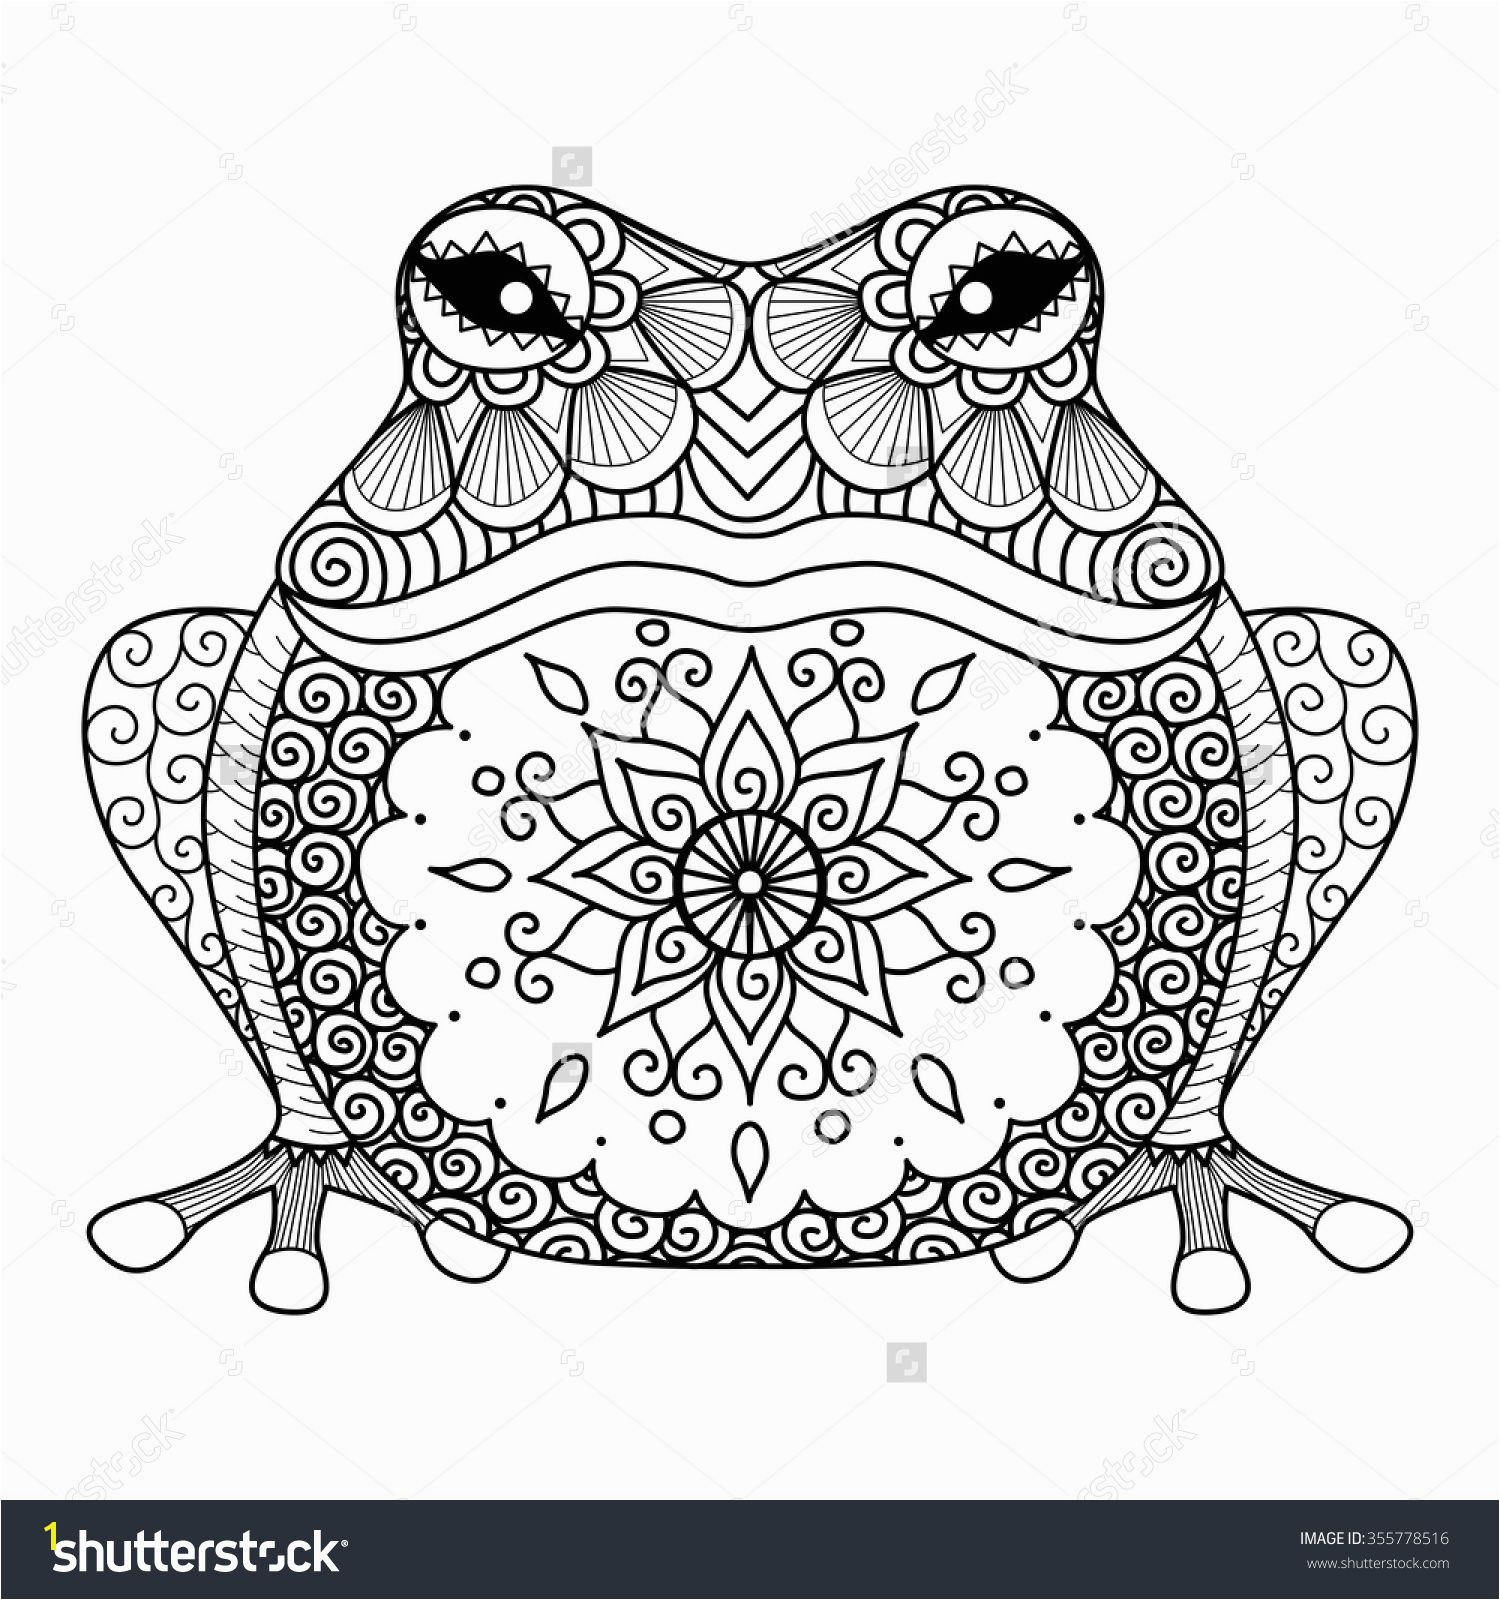 Hand drawn zentangle frog for coloring book for adult shirt design